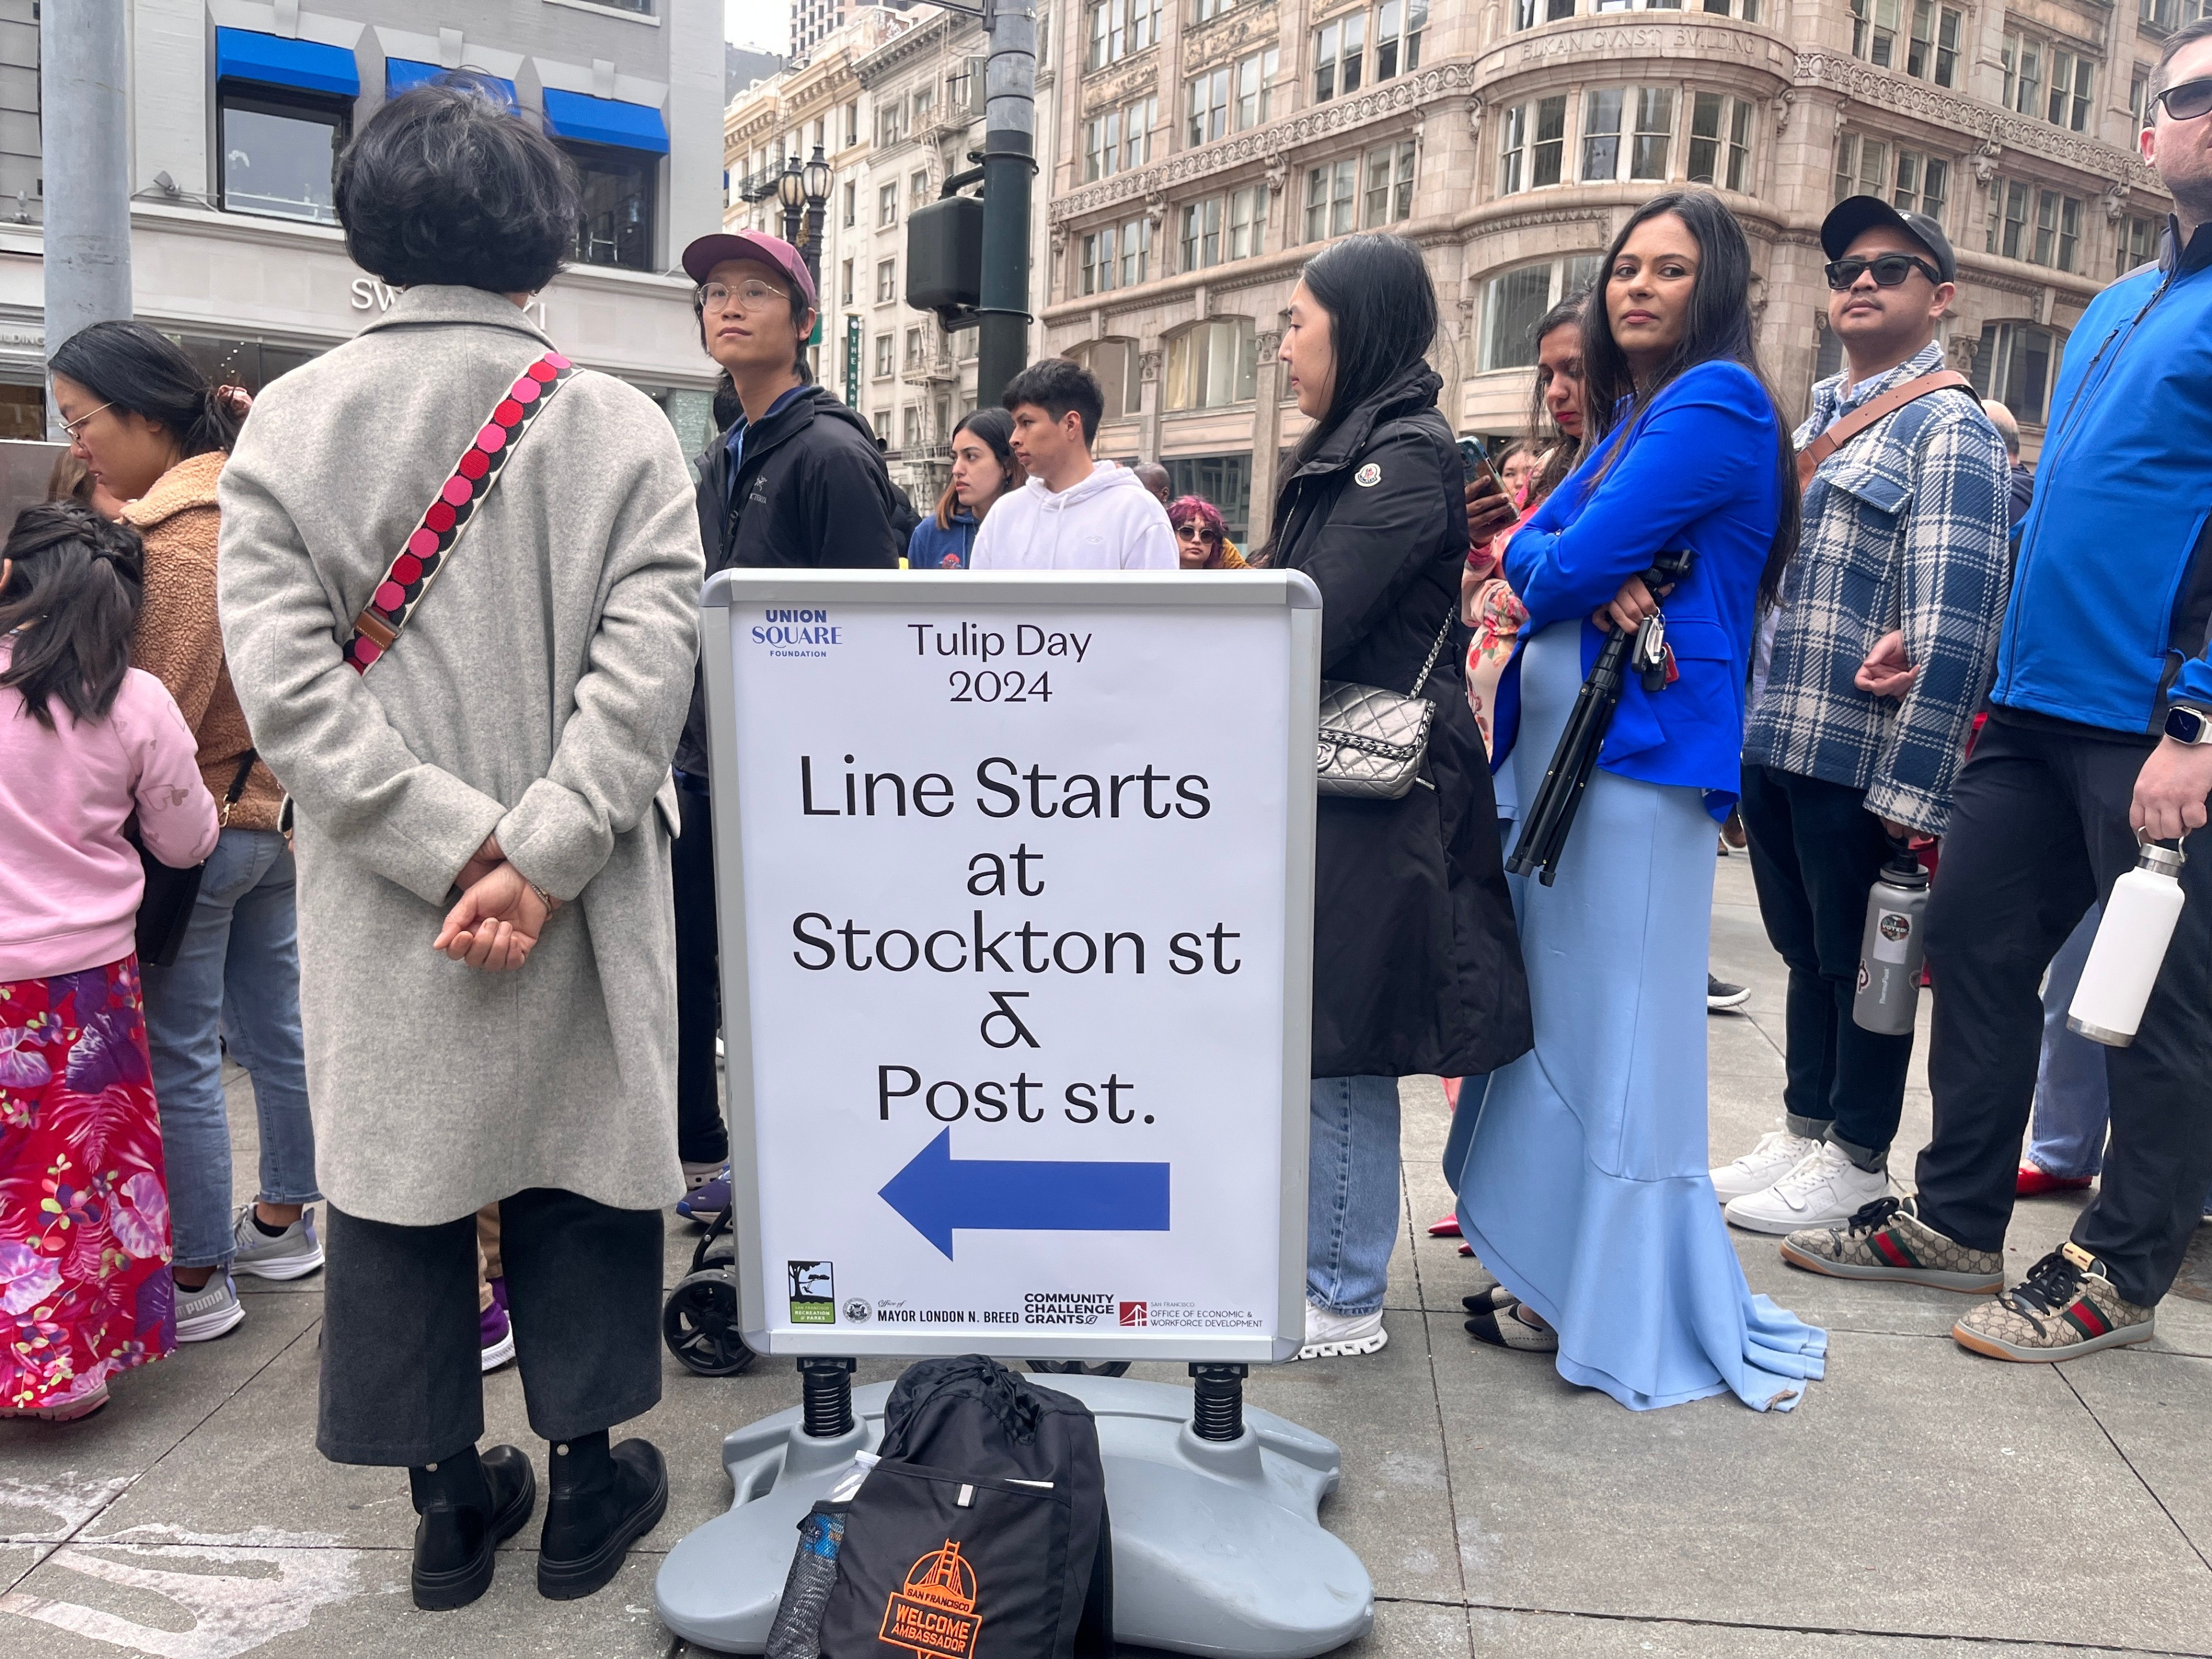 A diverse crowd stands by a sign indicating the start of a line for Tulip Day 2024 at an urban intersection.